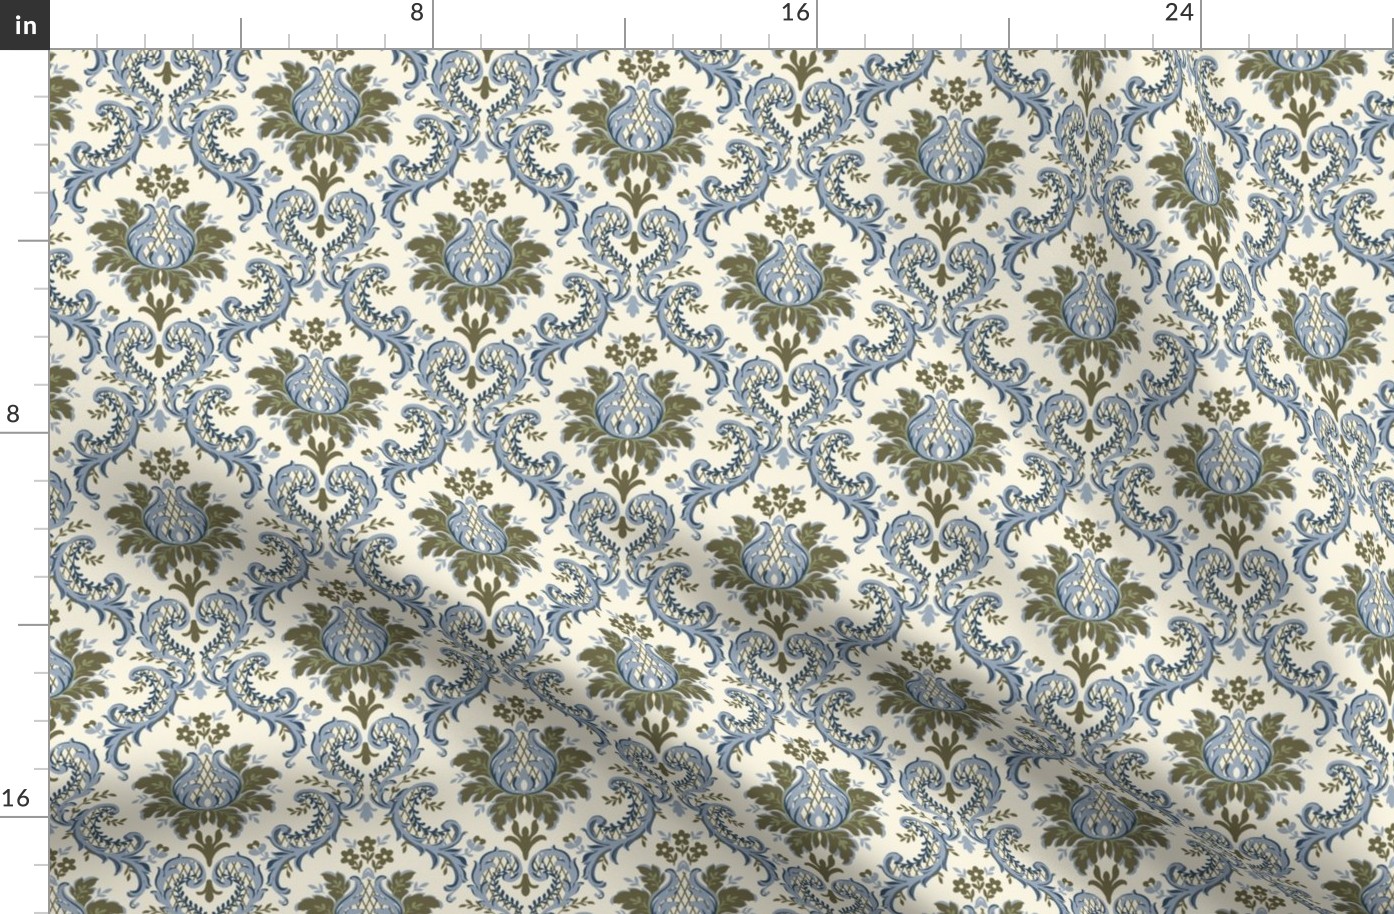 Intricate Victorian Floral Damask in Green and Wedgewood Blue on Ivory - Coordinate